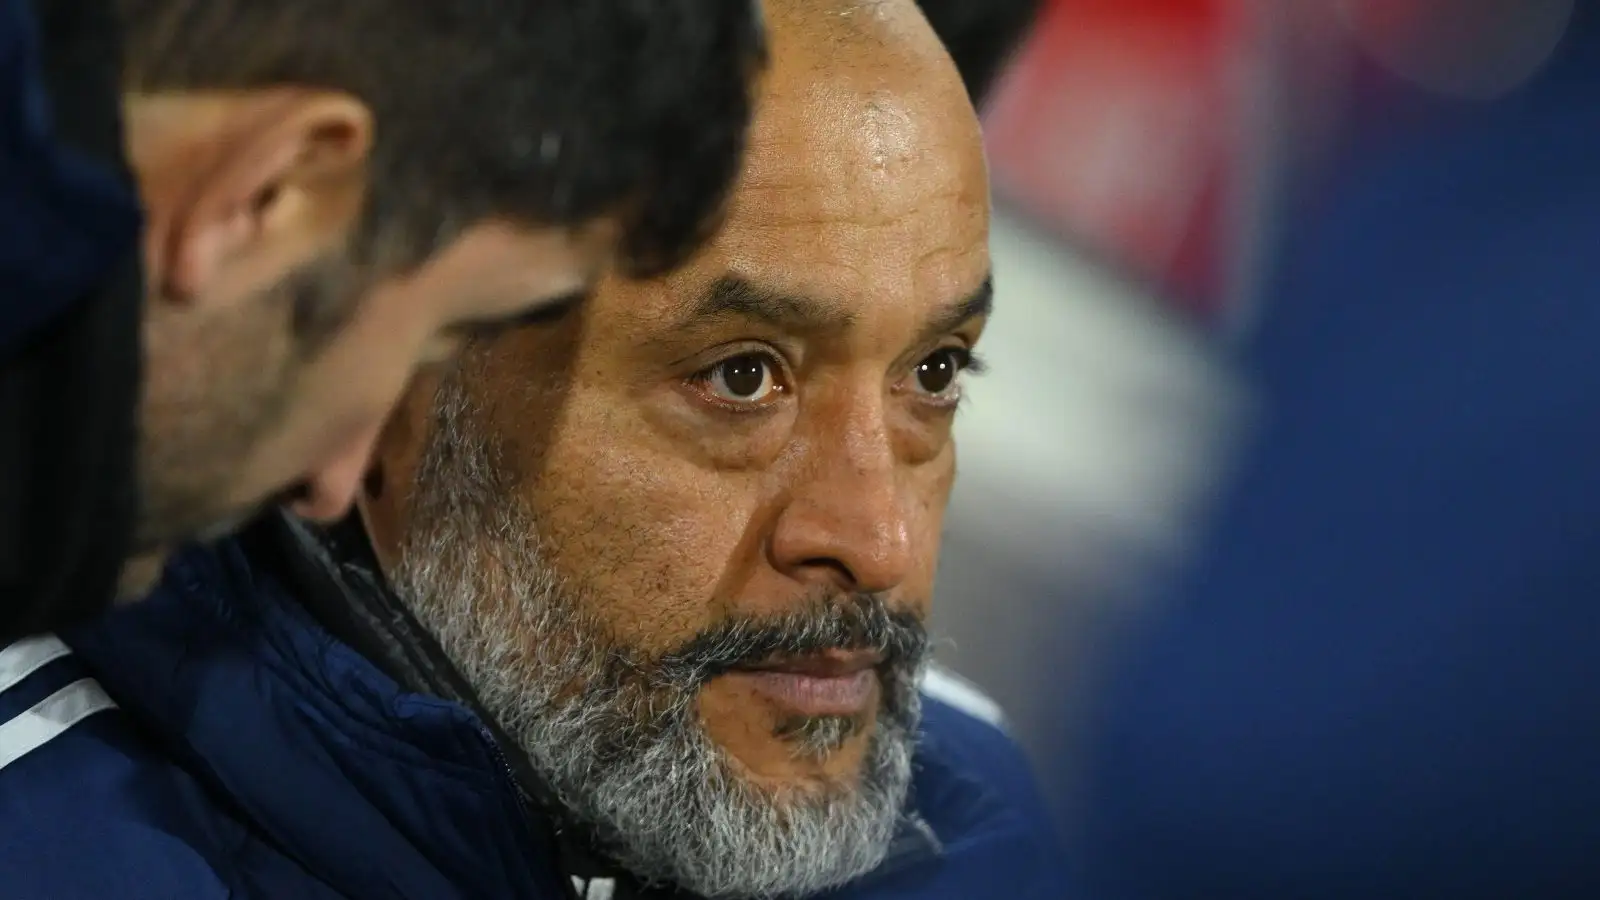 Nottingham Woodland head trainer Nuno Espirito Santo rests on the pew before a match.